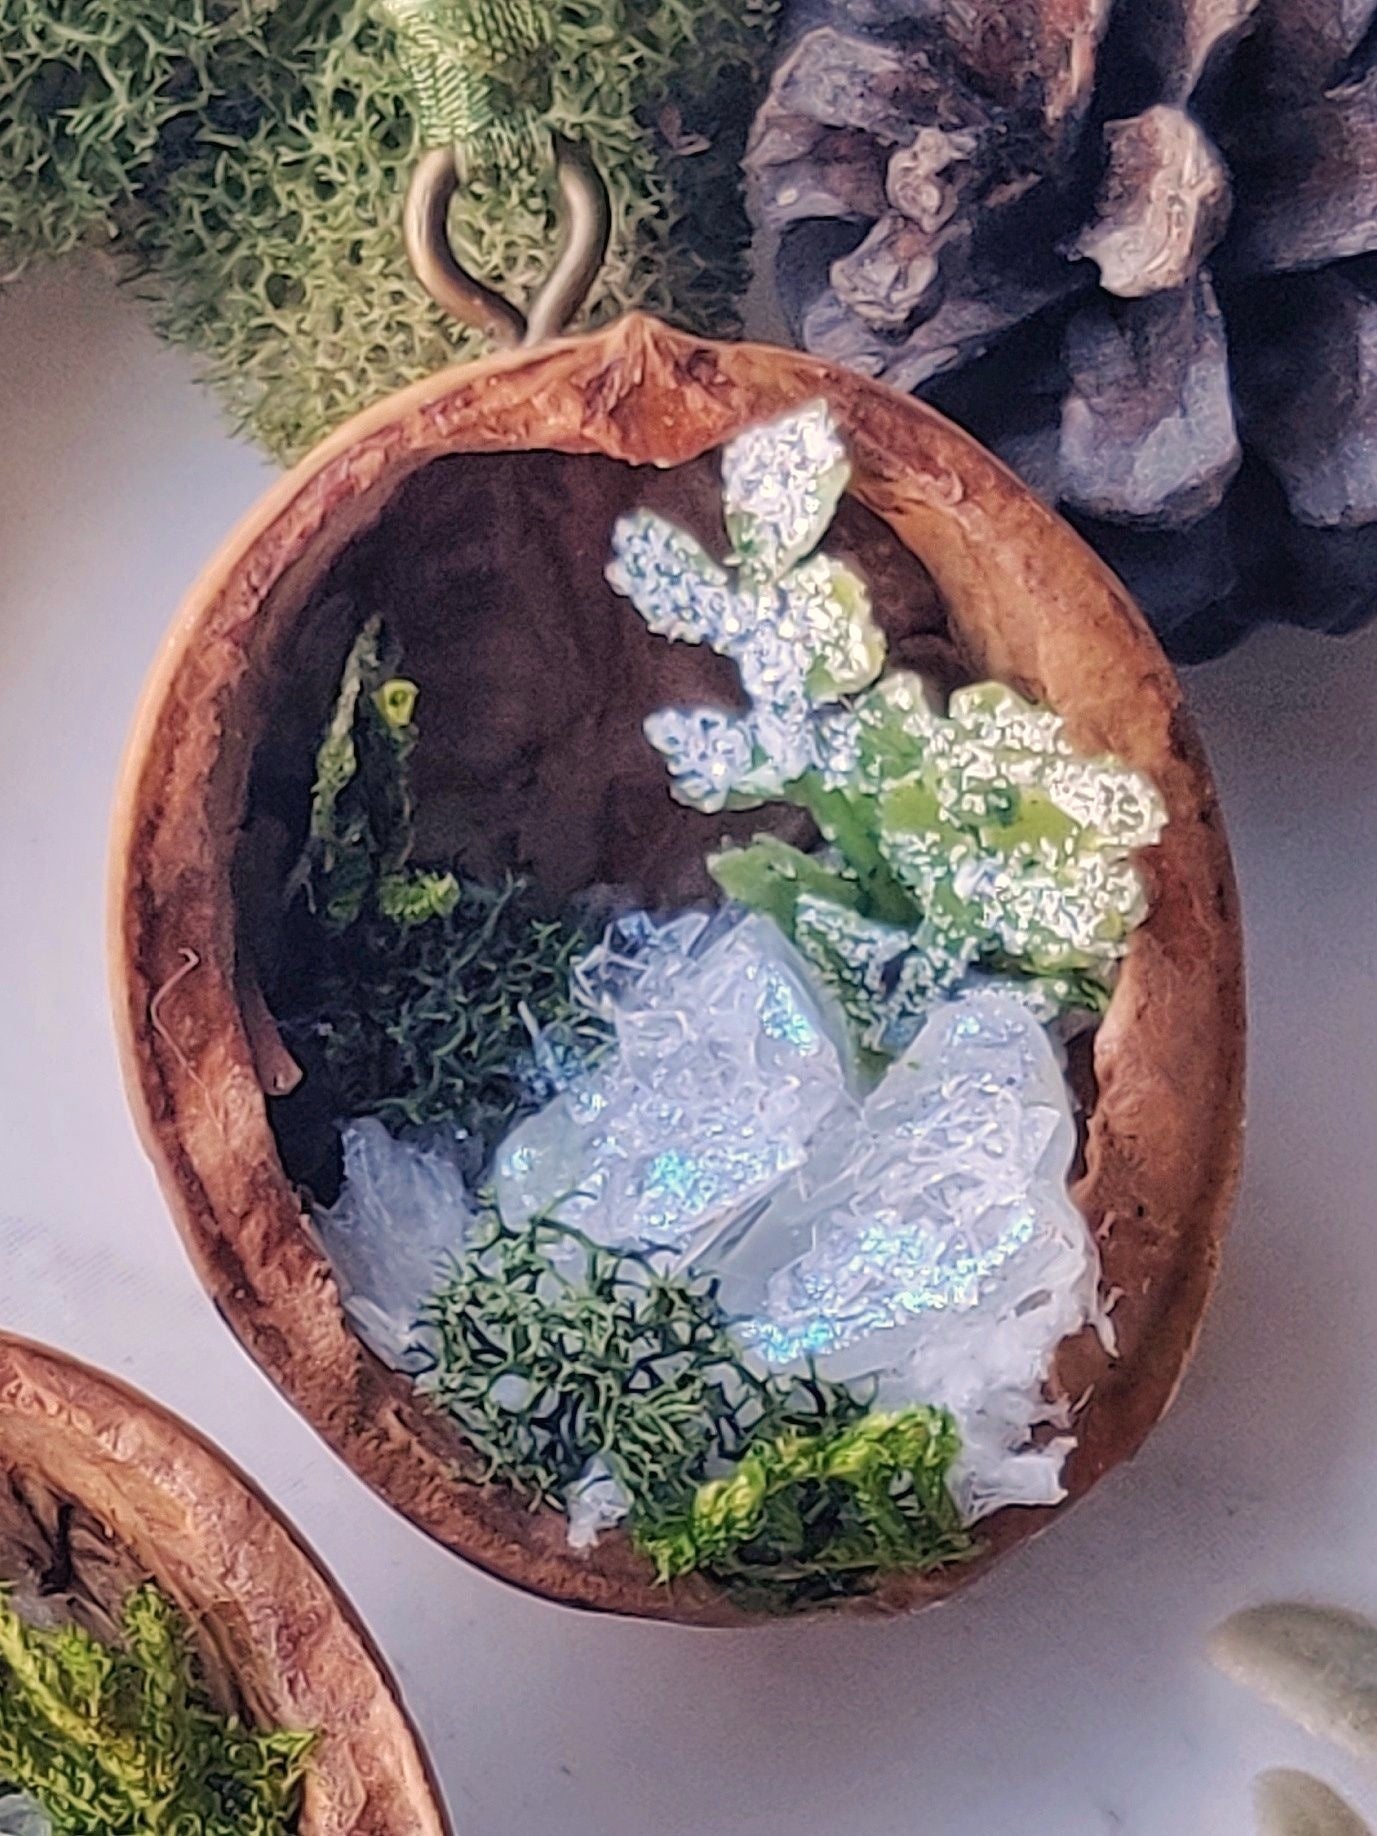 Forest Frost Terrarium™ Charms - set of 2 enchanted nature ornaments